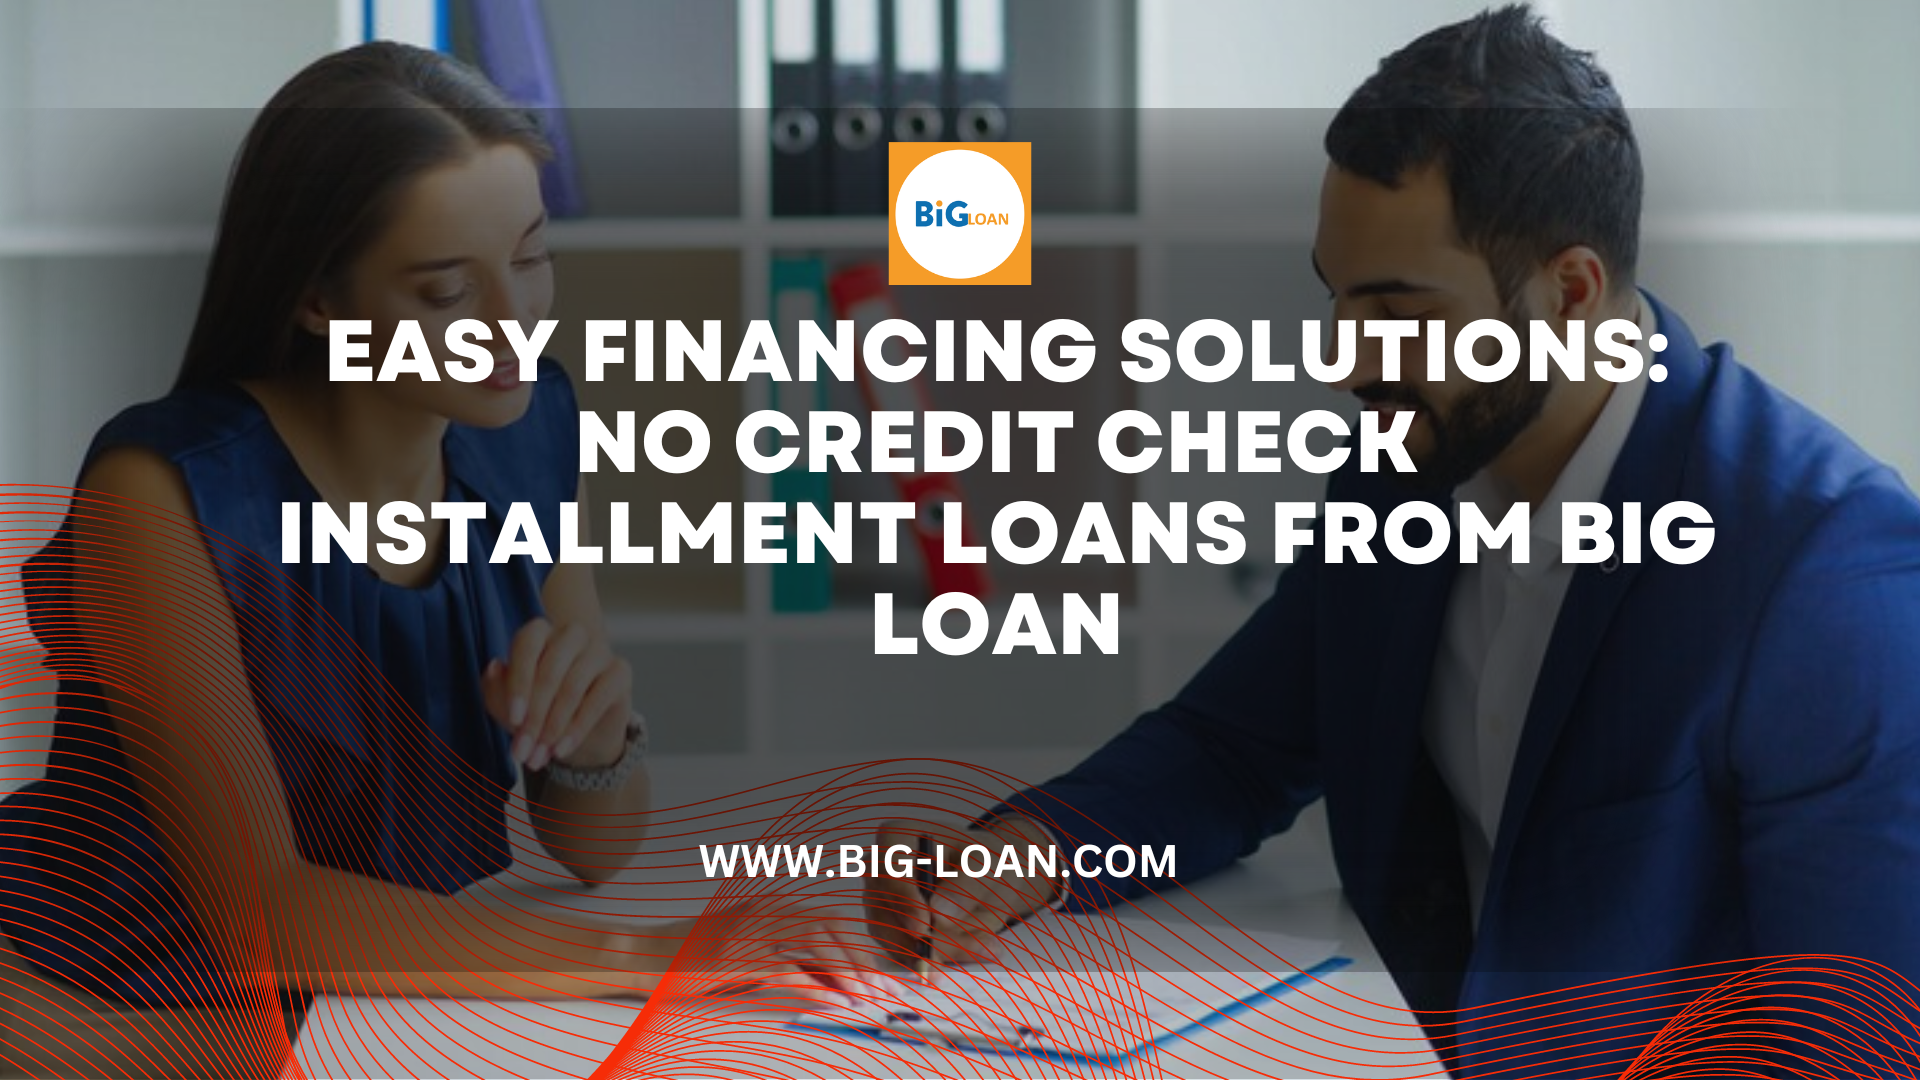  Secure Your Future: Installment Loans with No Credit Check from Big Loan